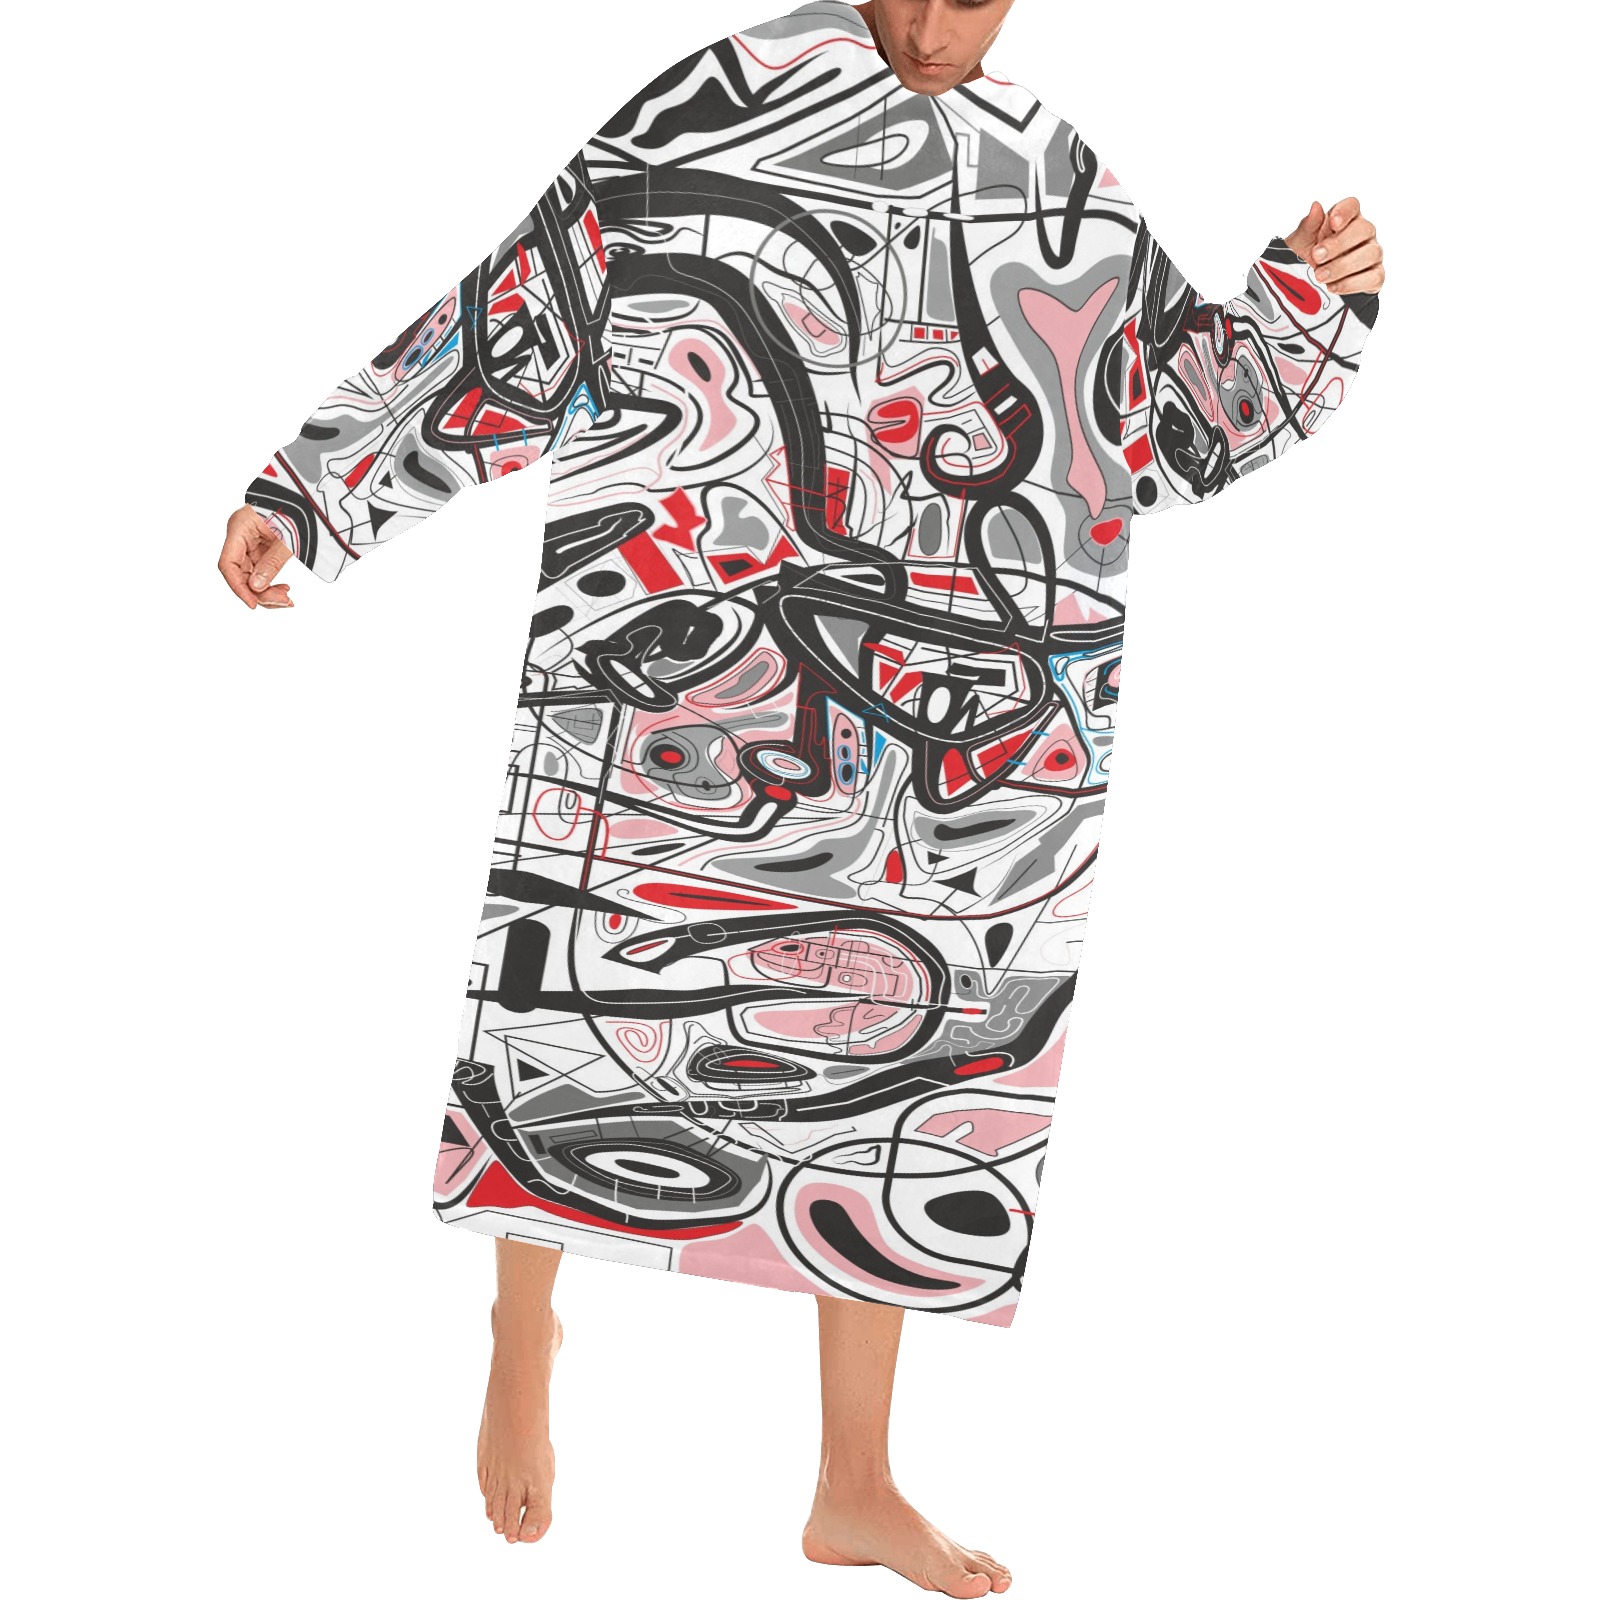 Model 2 Blanket Robe with Sleeves for Adults